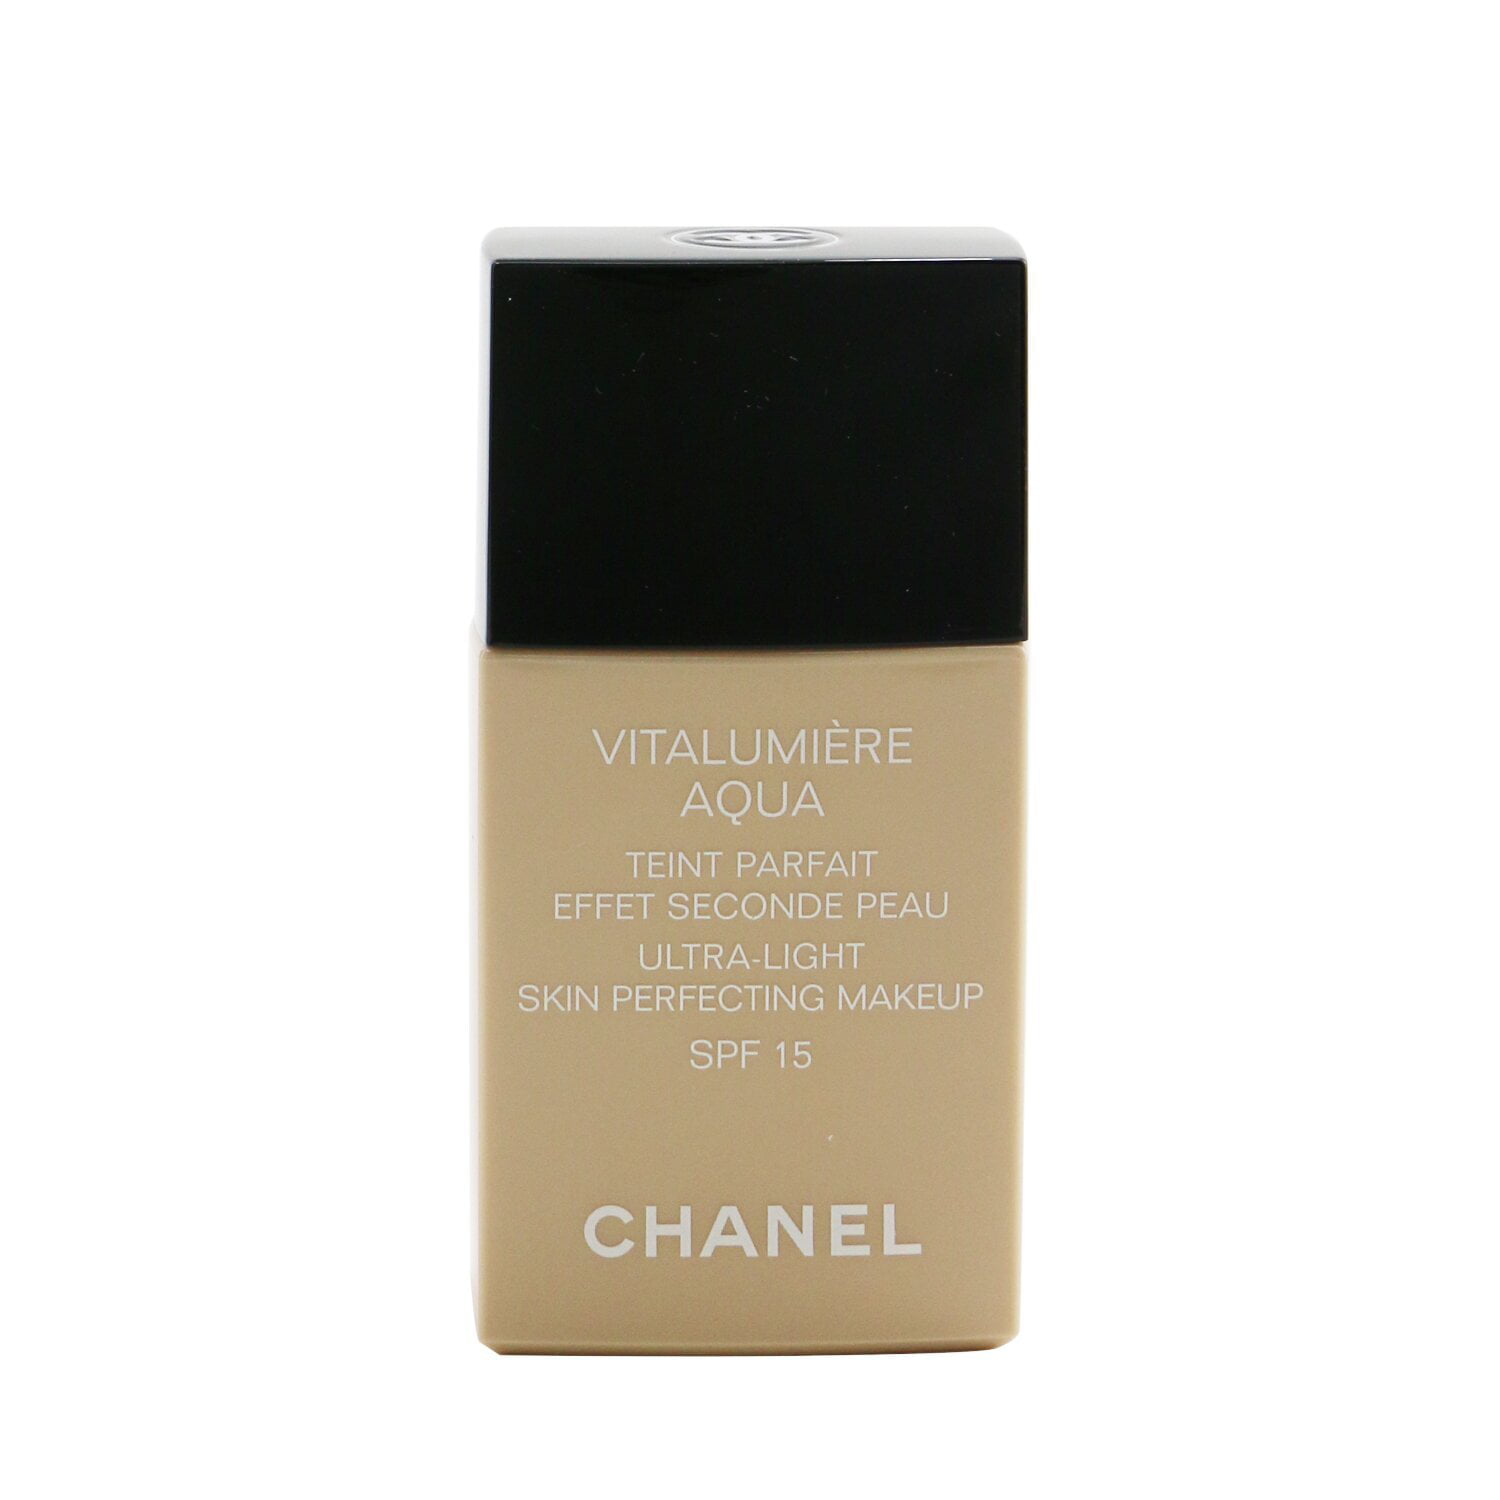 Vitalumiere Aqua Ultra-Light Skin Perfecting Makeup SPF 15 - # 32 Beige Rose  by Chanel for Women - 1 